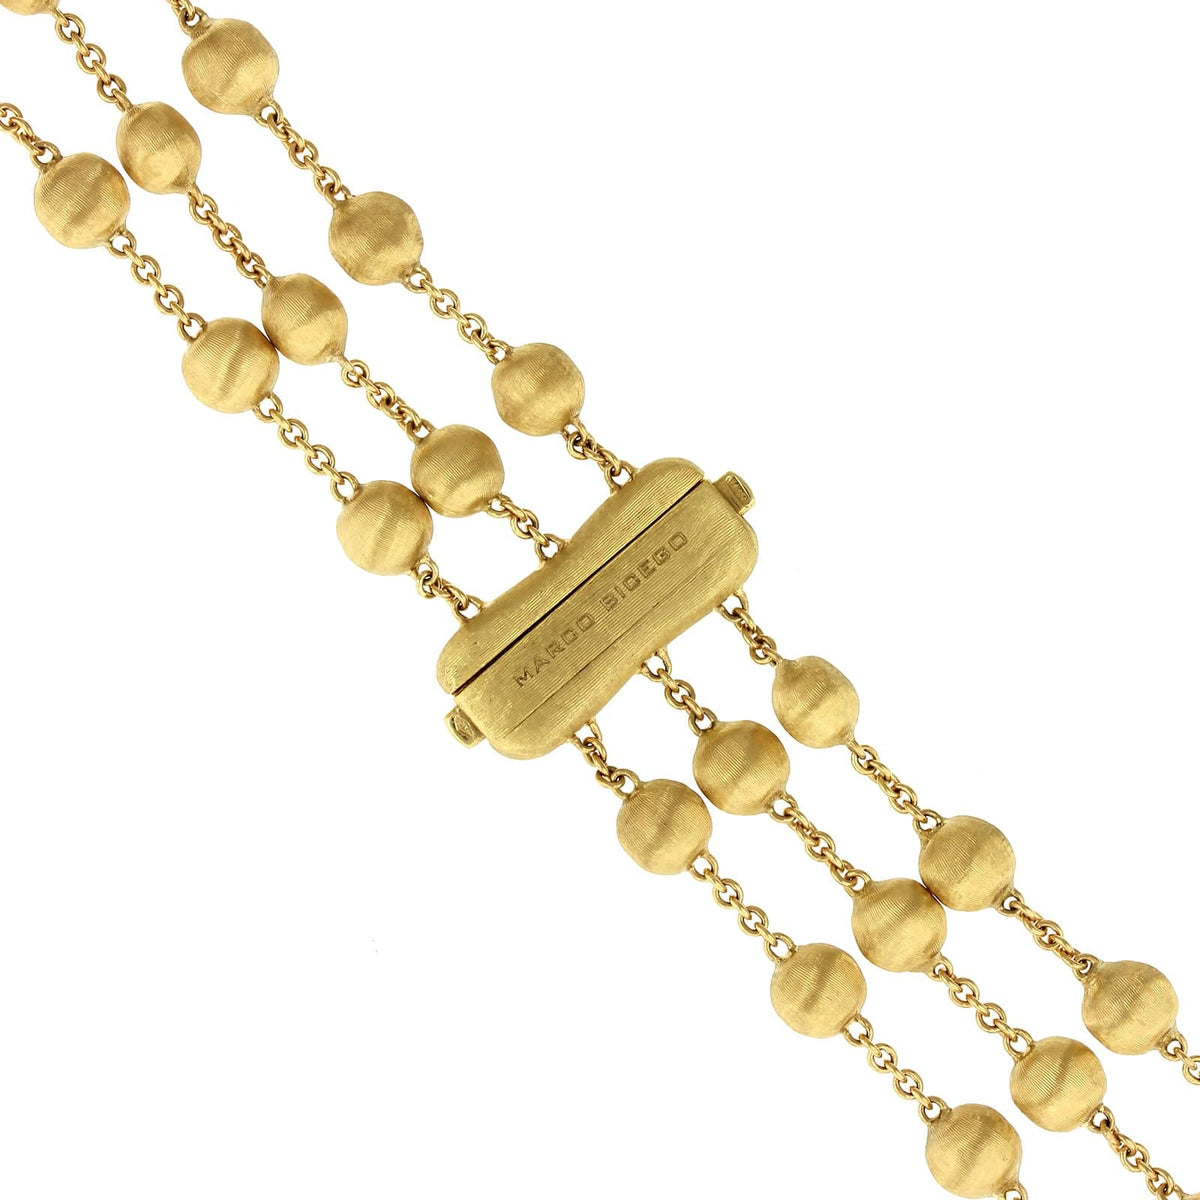 Marco Bicego Africa 18K Yellow Gold Turquoise Bead Necklace